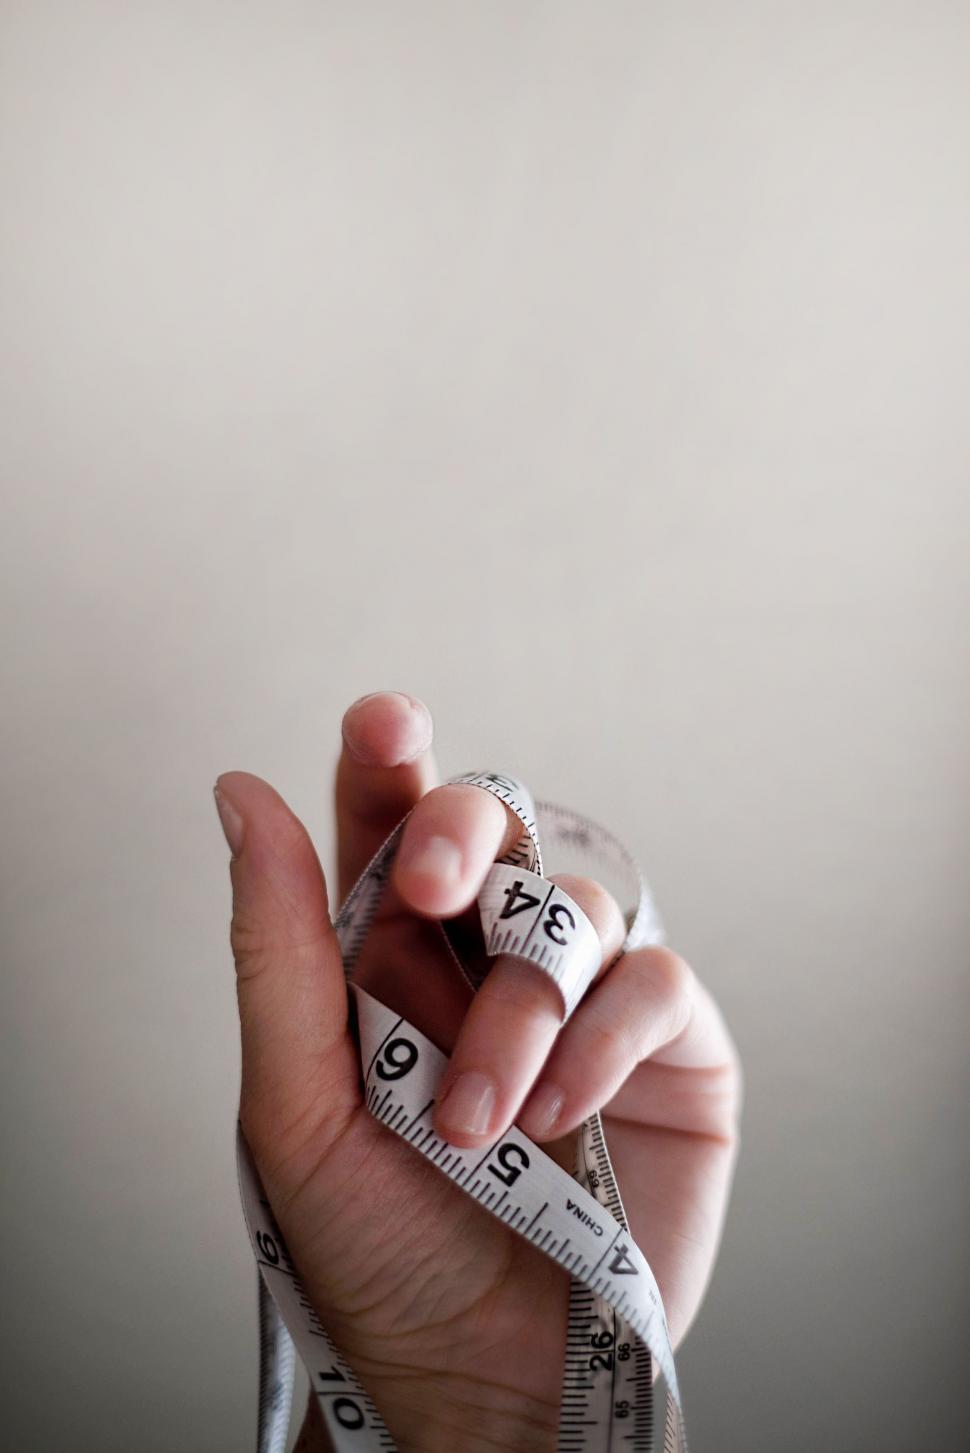 Free Image of Person Holding a Measuring Tape 